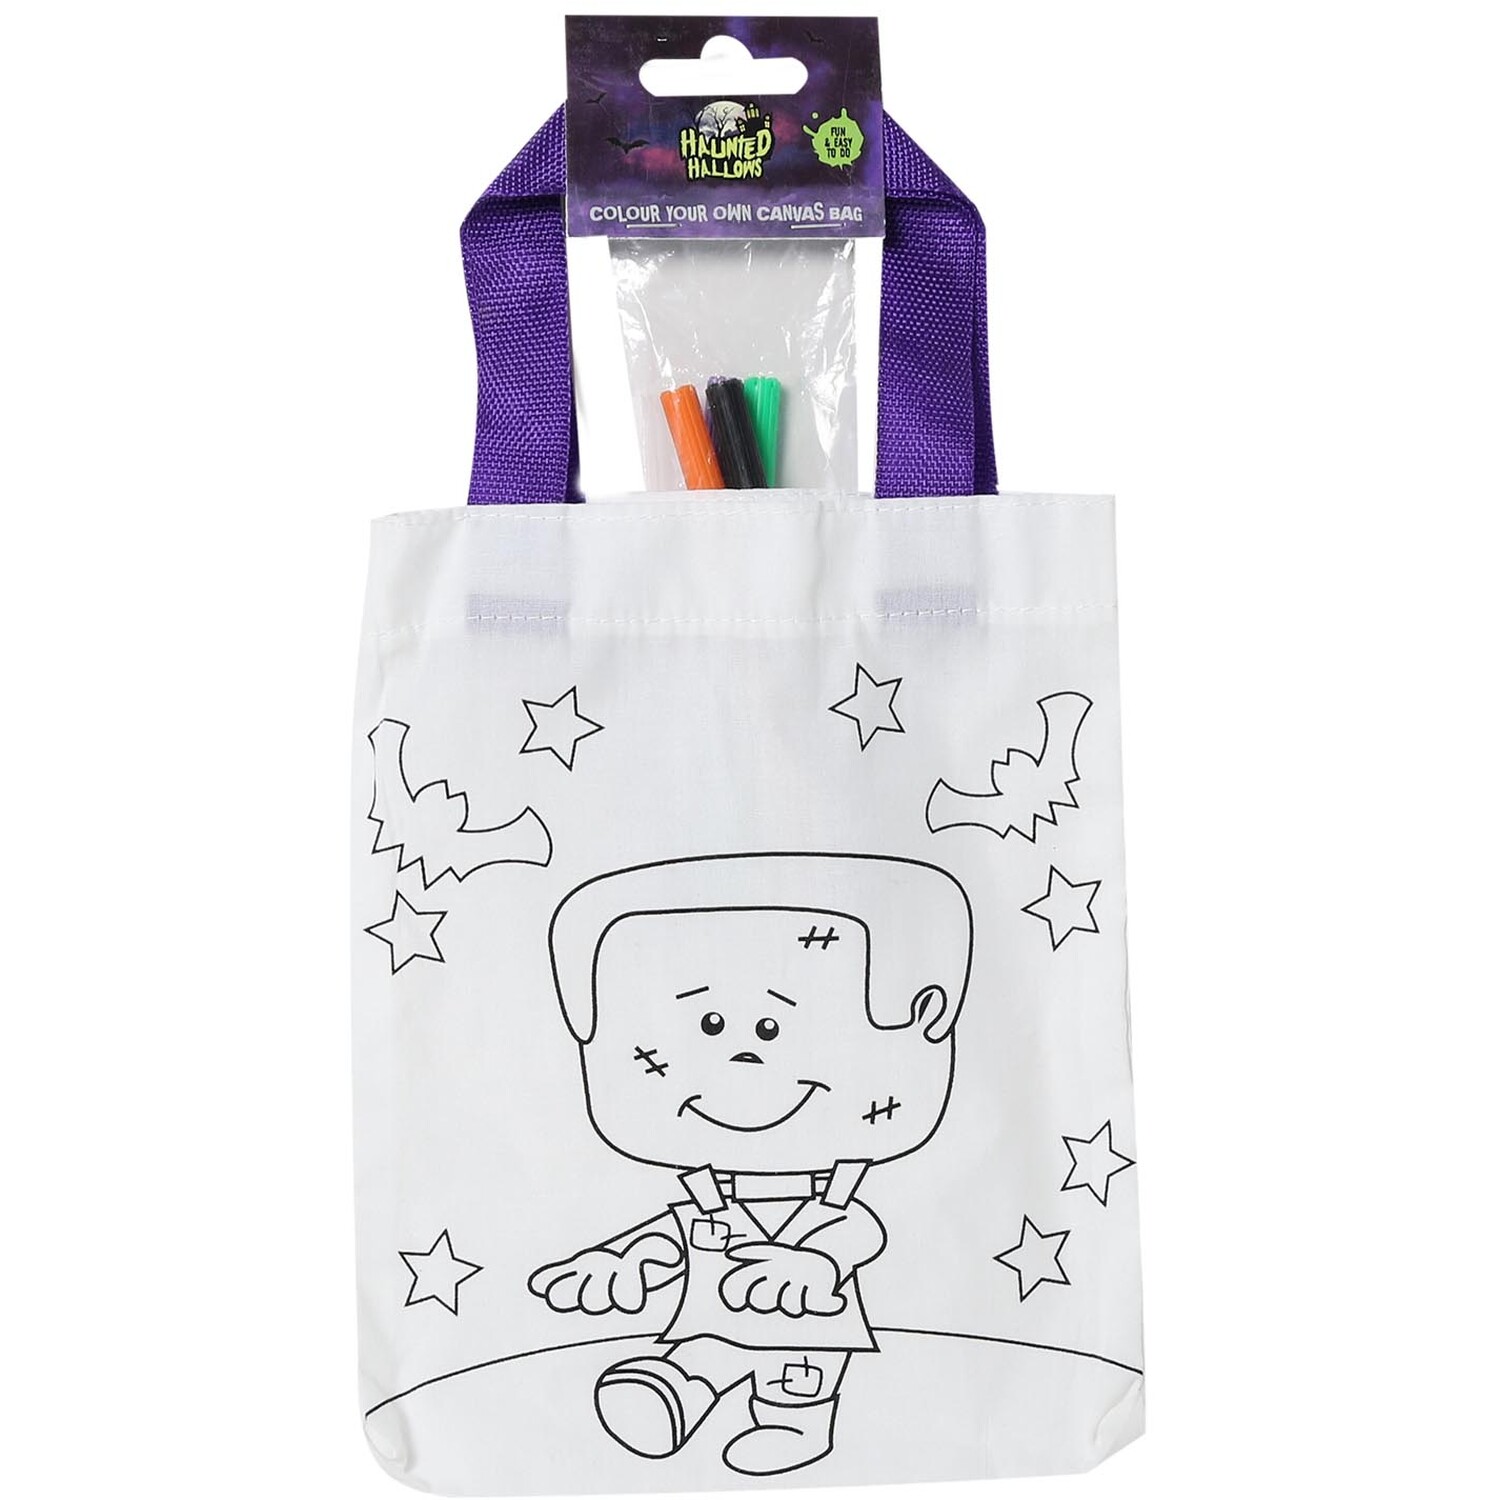 Create Your Own Halloween Canvas Bag Image 3